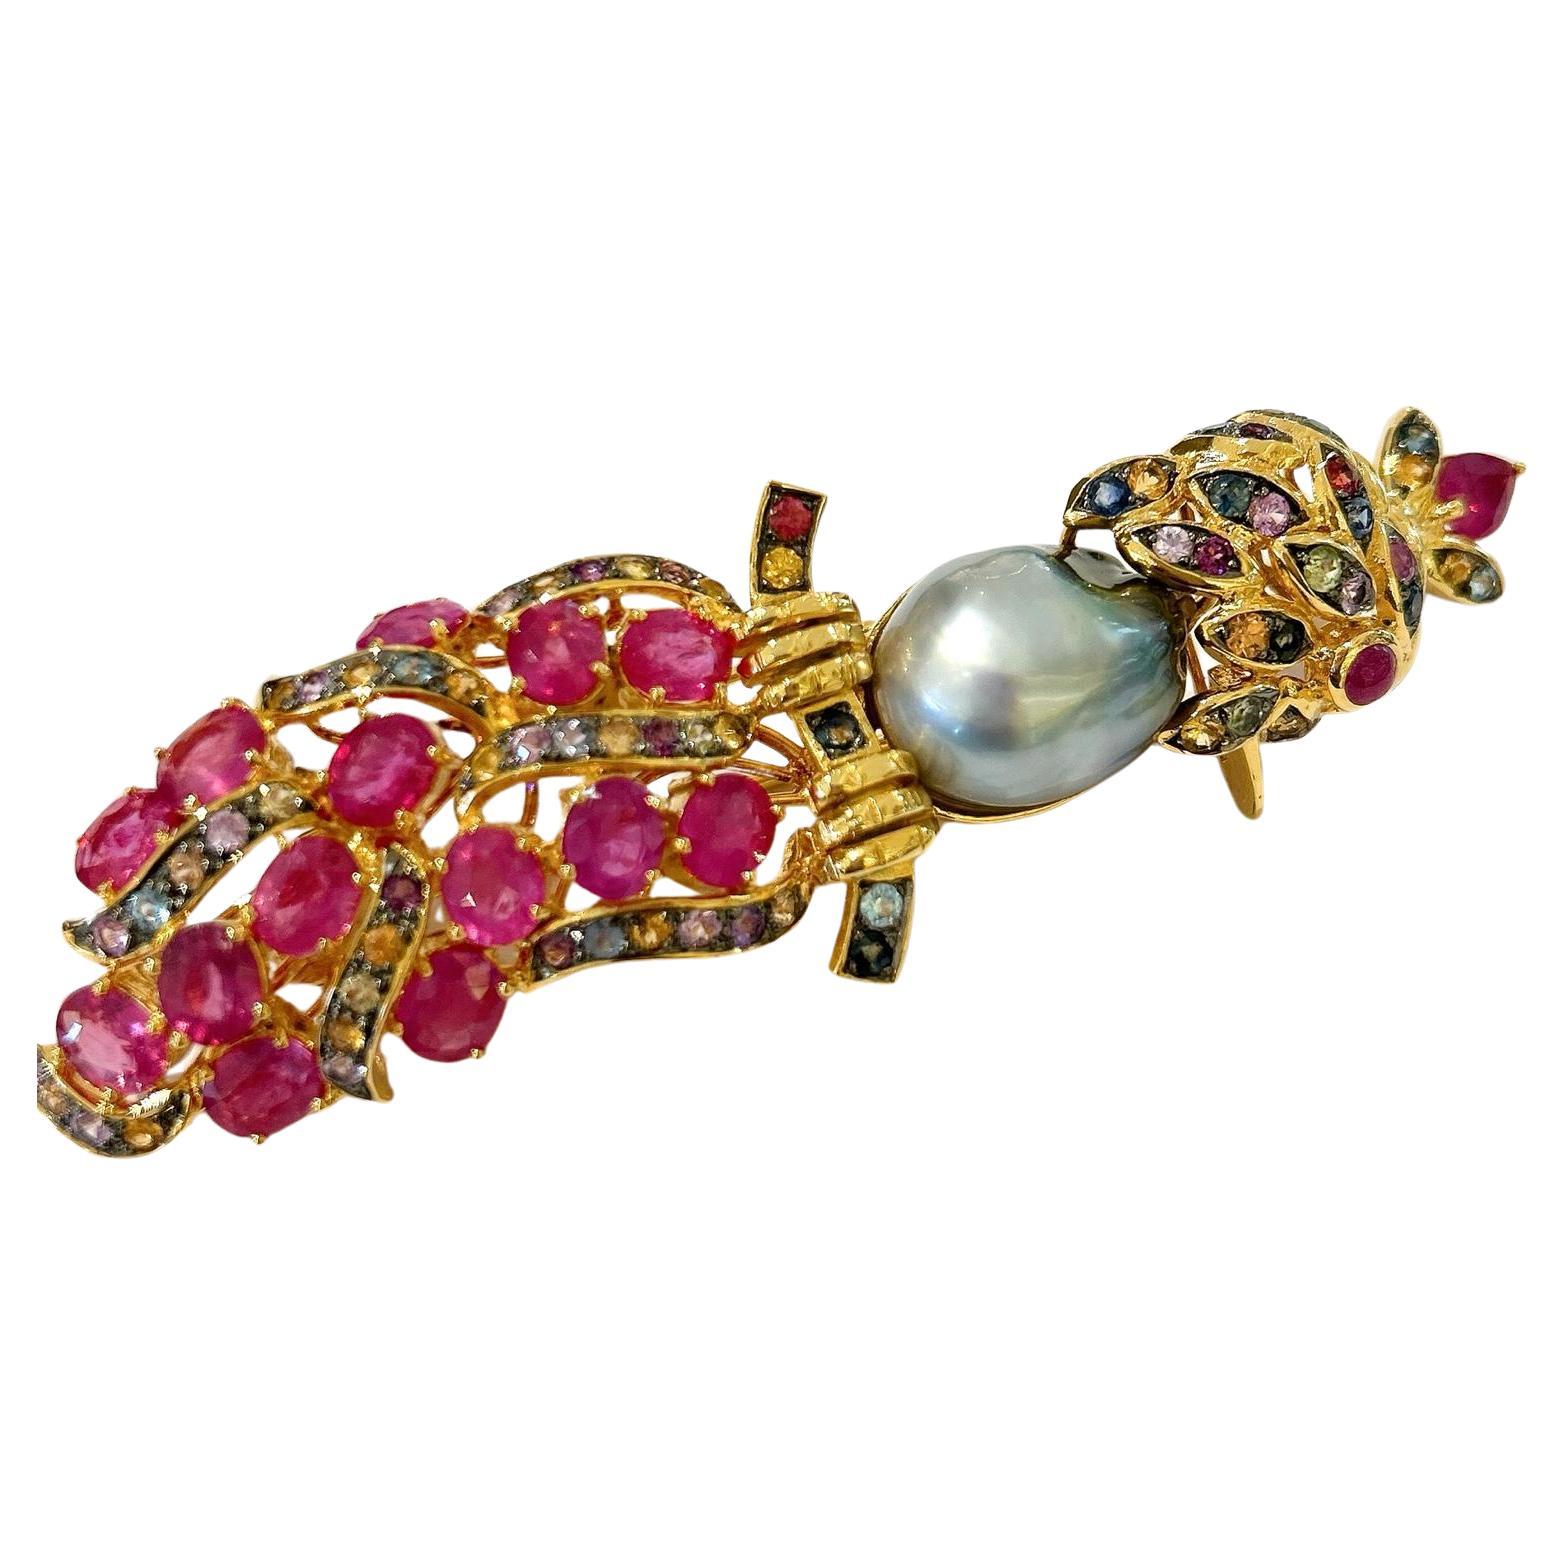 The Bochic "Orient" Pearl, Rubies & Sapphires Pendant Set In 18K Gold & Silver